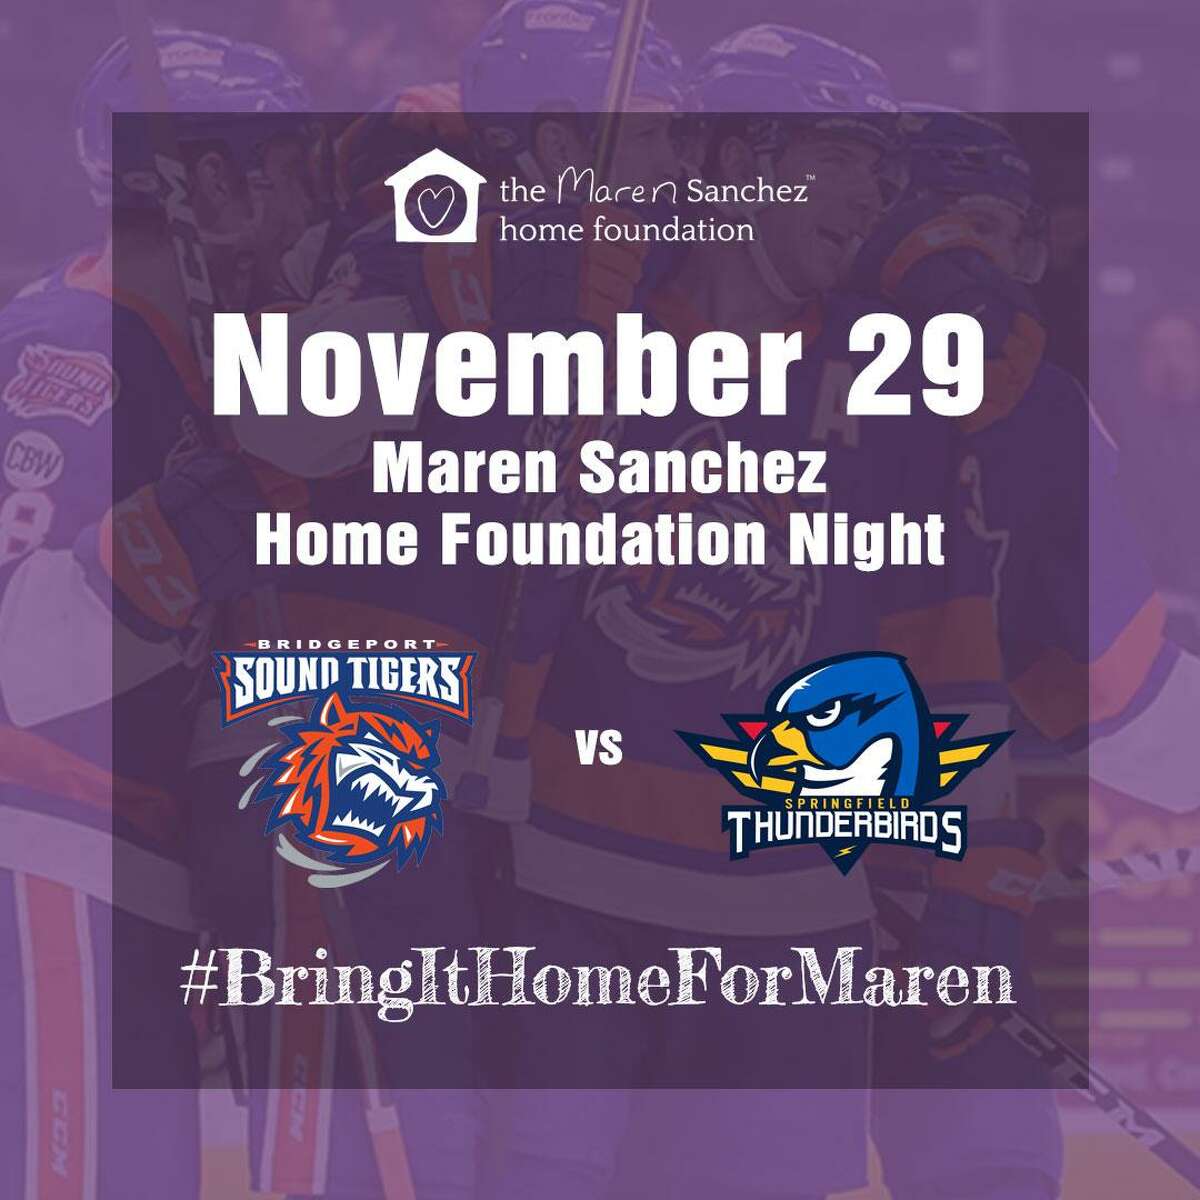 Maren Sanchez Home Foundation Night will be held at the Bridgeport Sound Tigers vs. Springfield Thunderbirds game on Friday, Nov. 29, at 7 p.m., at Webster Bank Arena in Bridgeport.